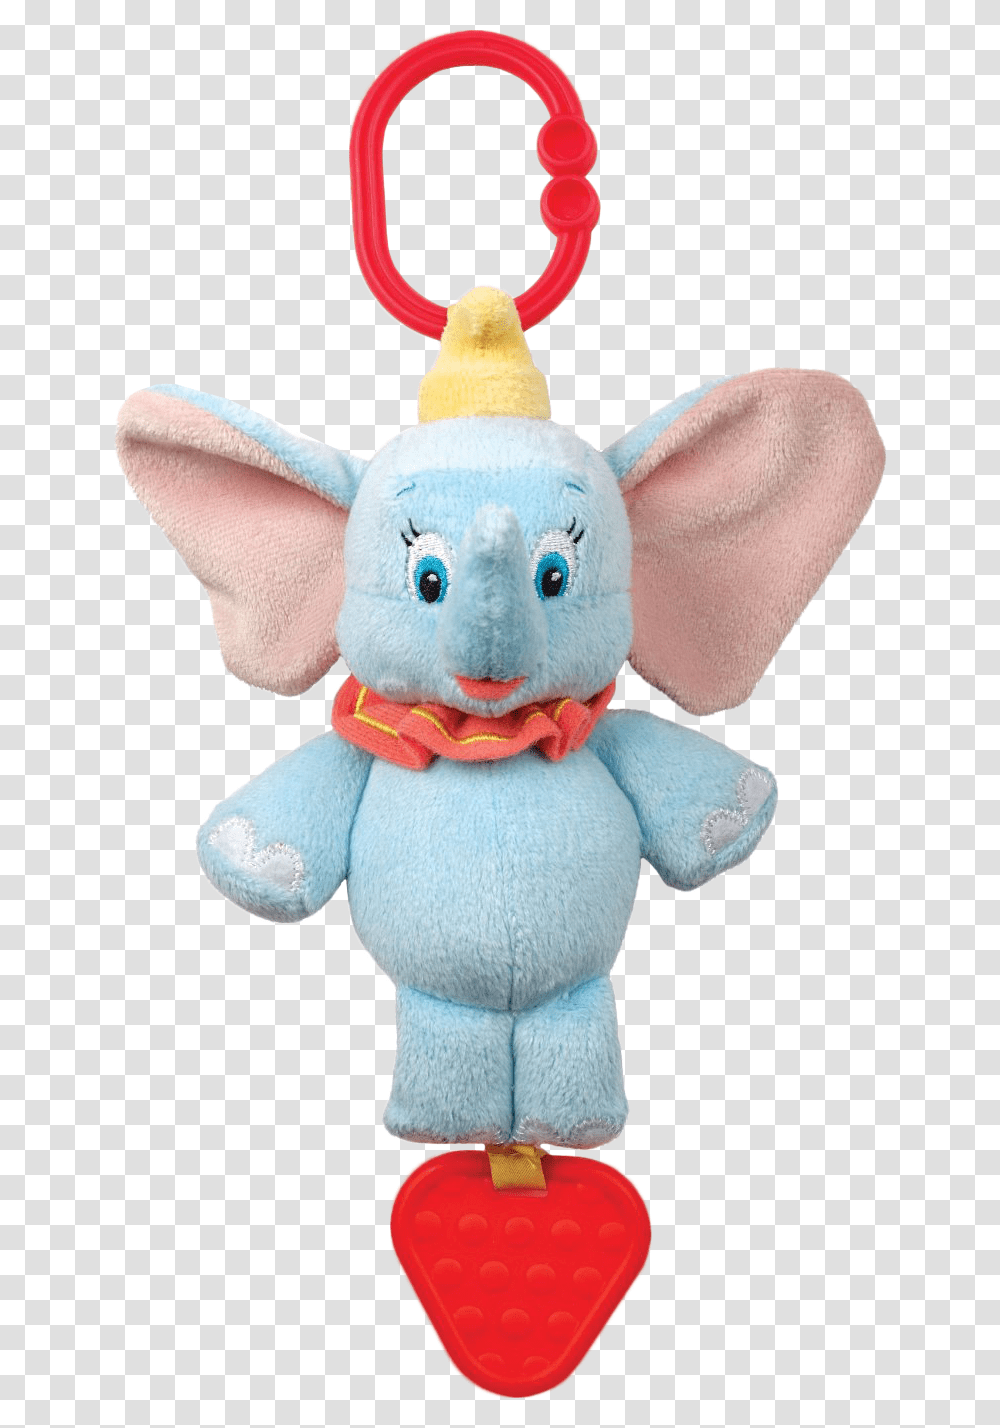 Dumbo On The Go Disney Dumbo Baby Toy, Plush, Doll, Figurine Transparent Png